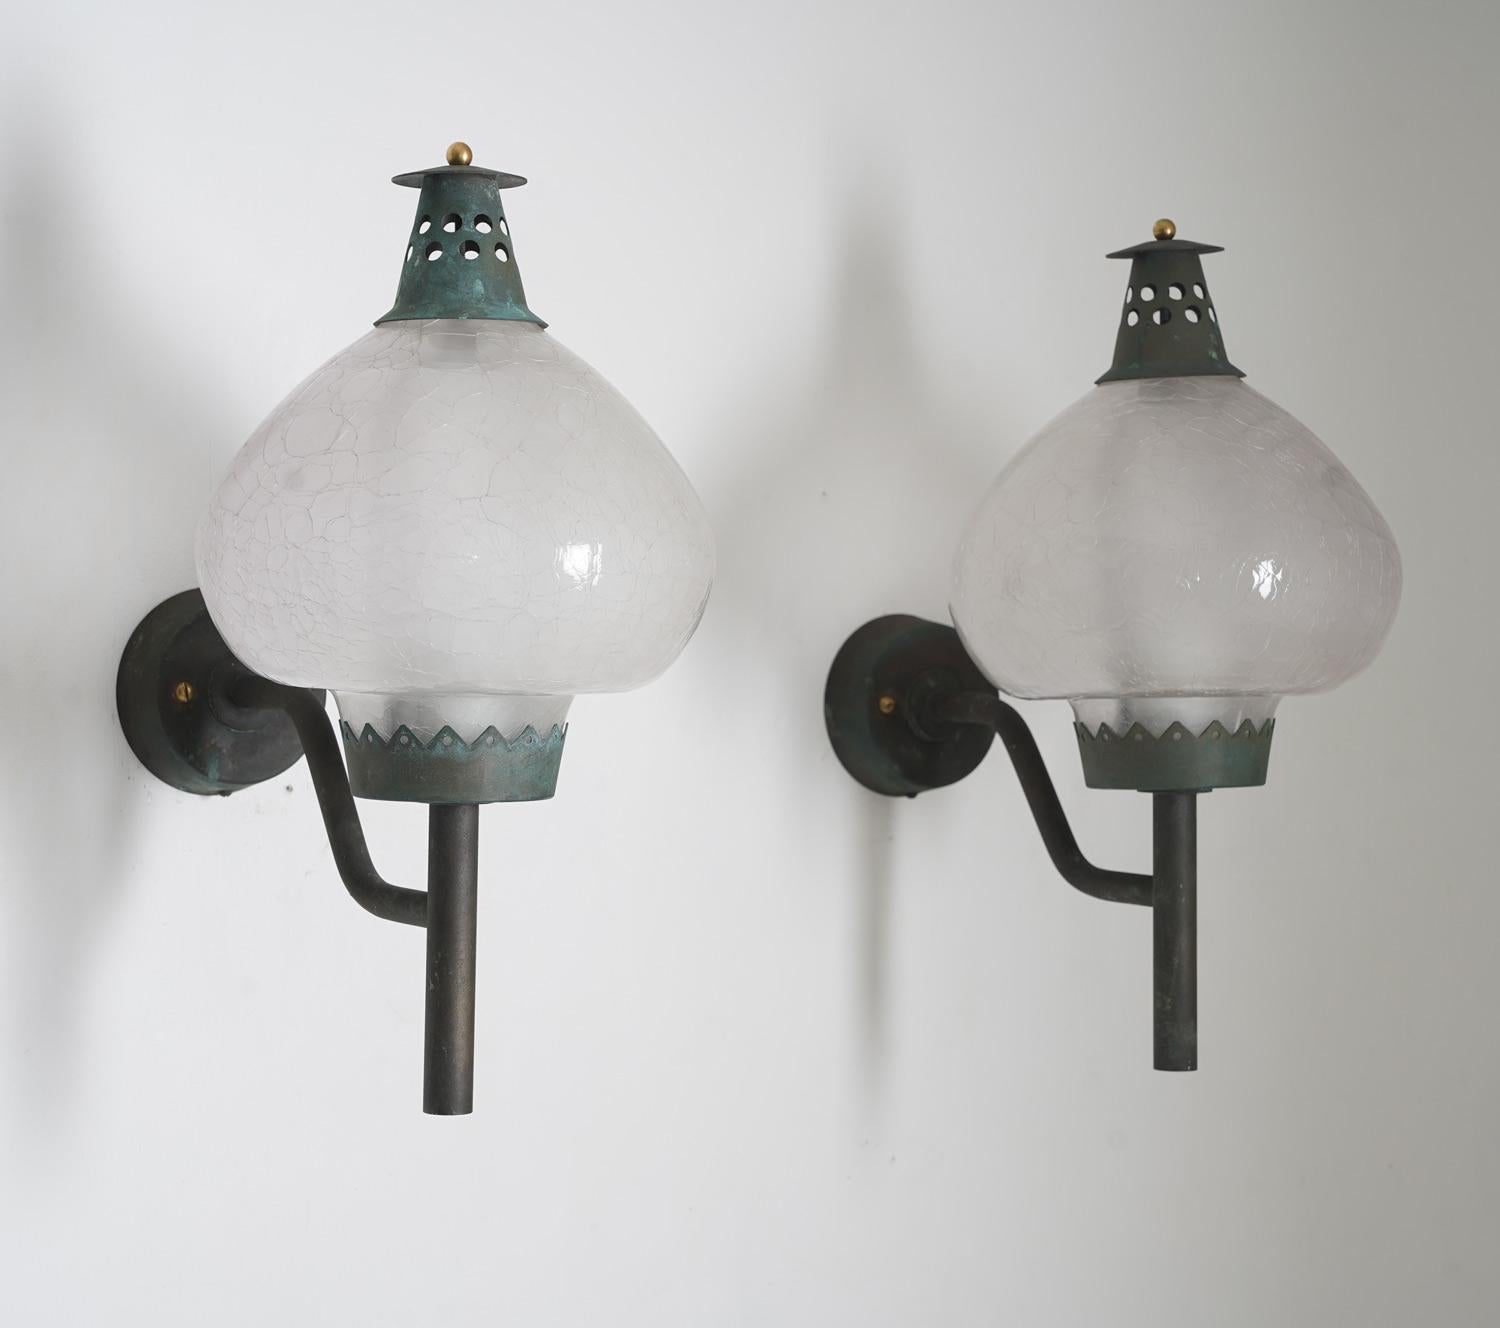 Pair of rare outdoor wall lamps in copper and glass by Hans-Agne Jakobsson, Sweden
These lamps are made of solid copper with glass shades. On top of the shades is a perforated copper hat, keeping the shade in place. 
Condition: Fantastic patina on